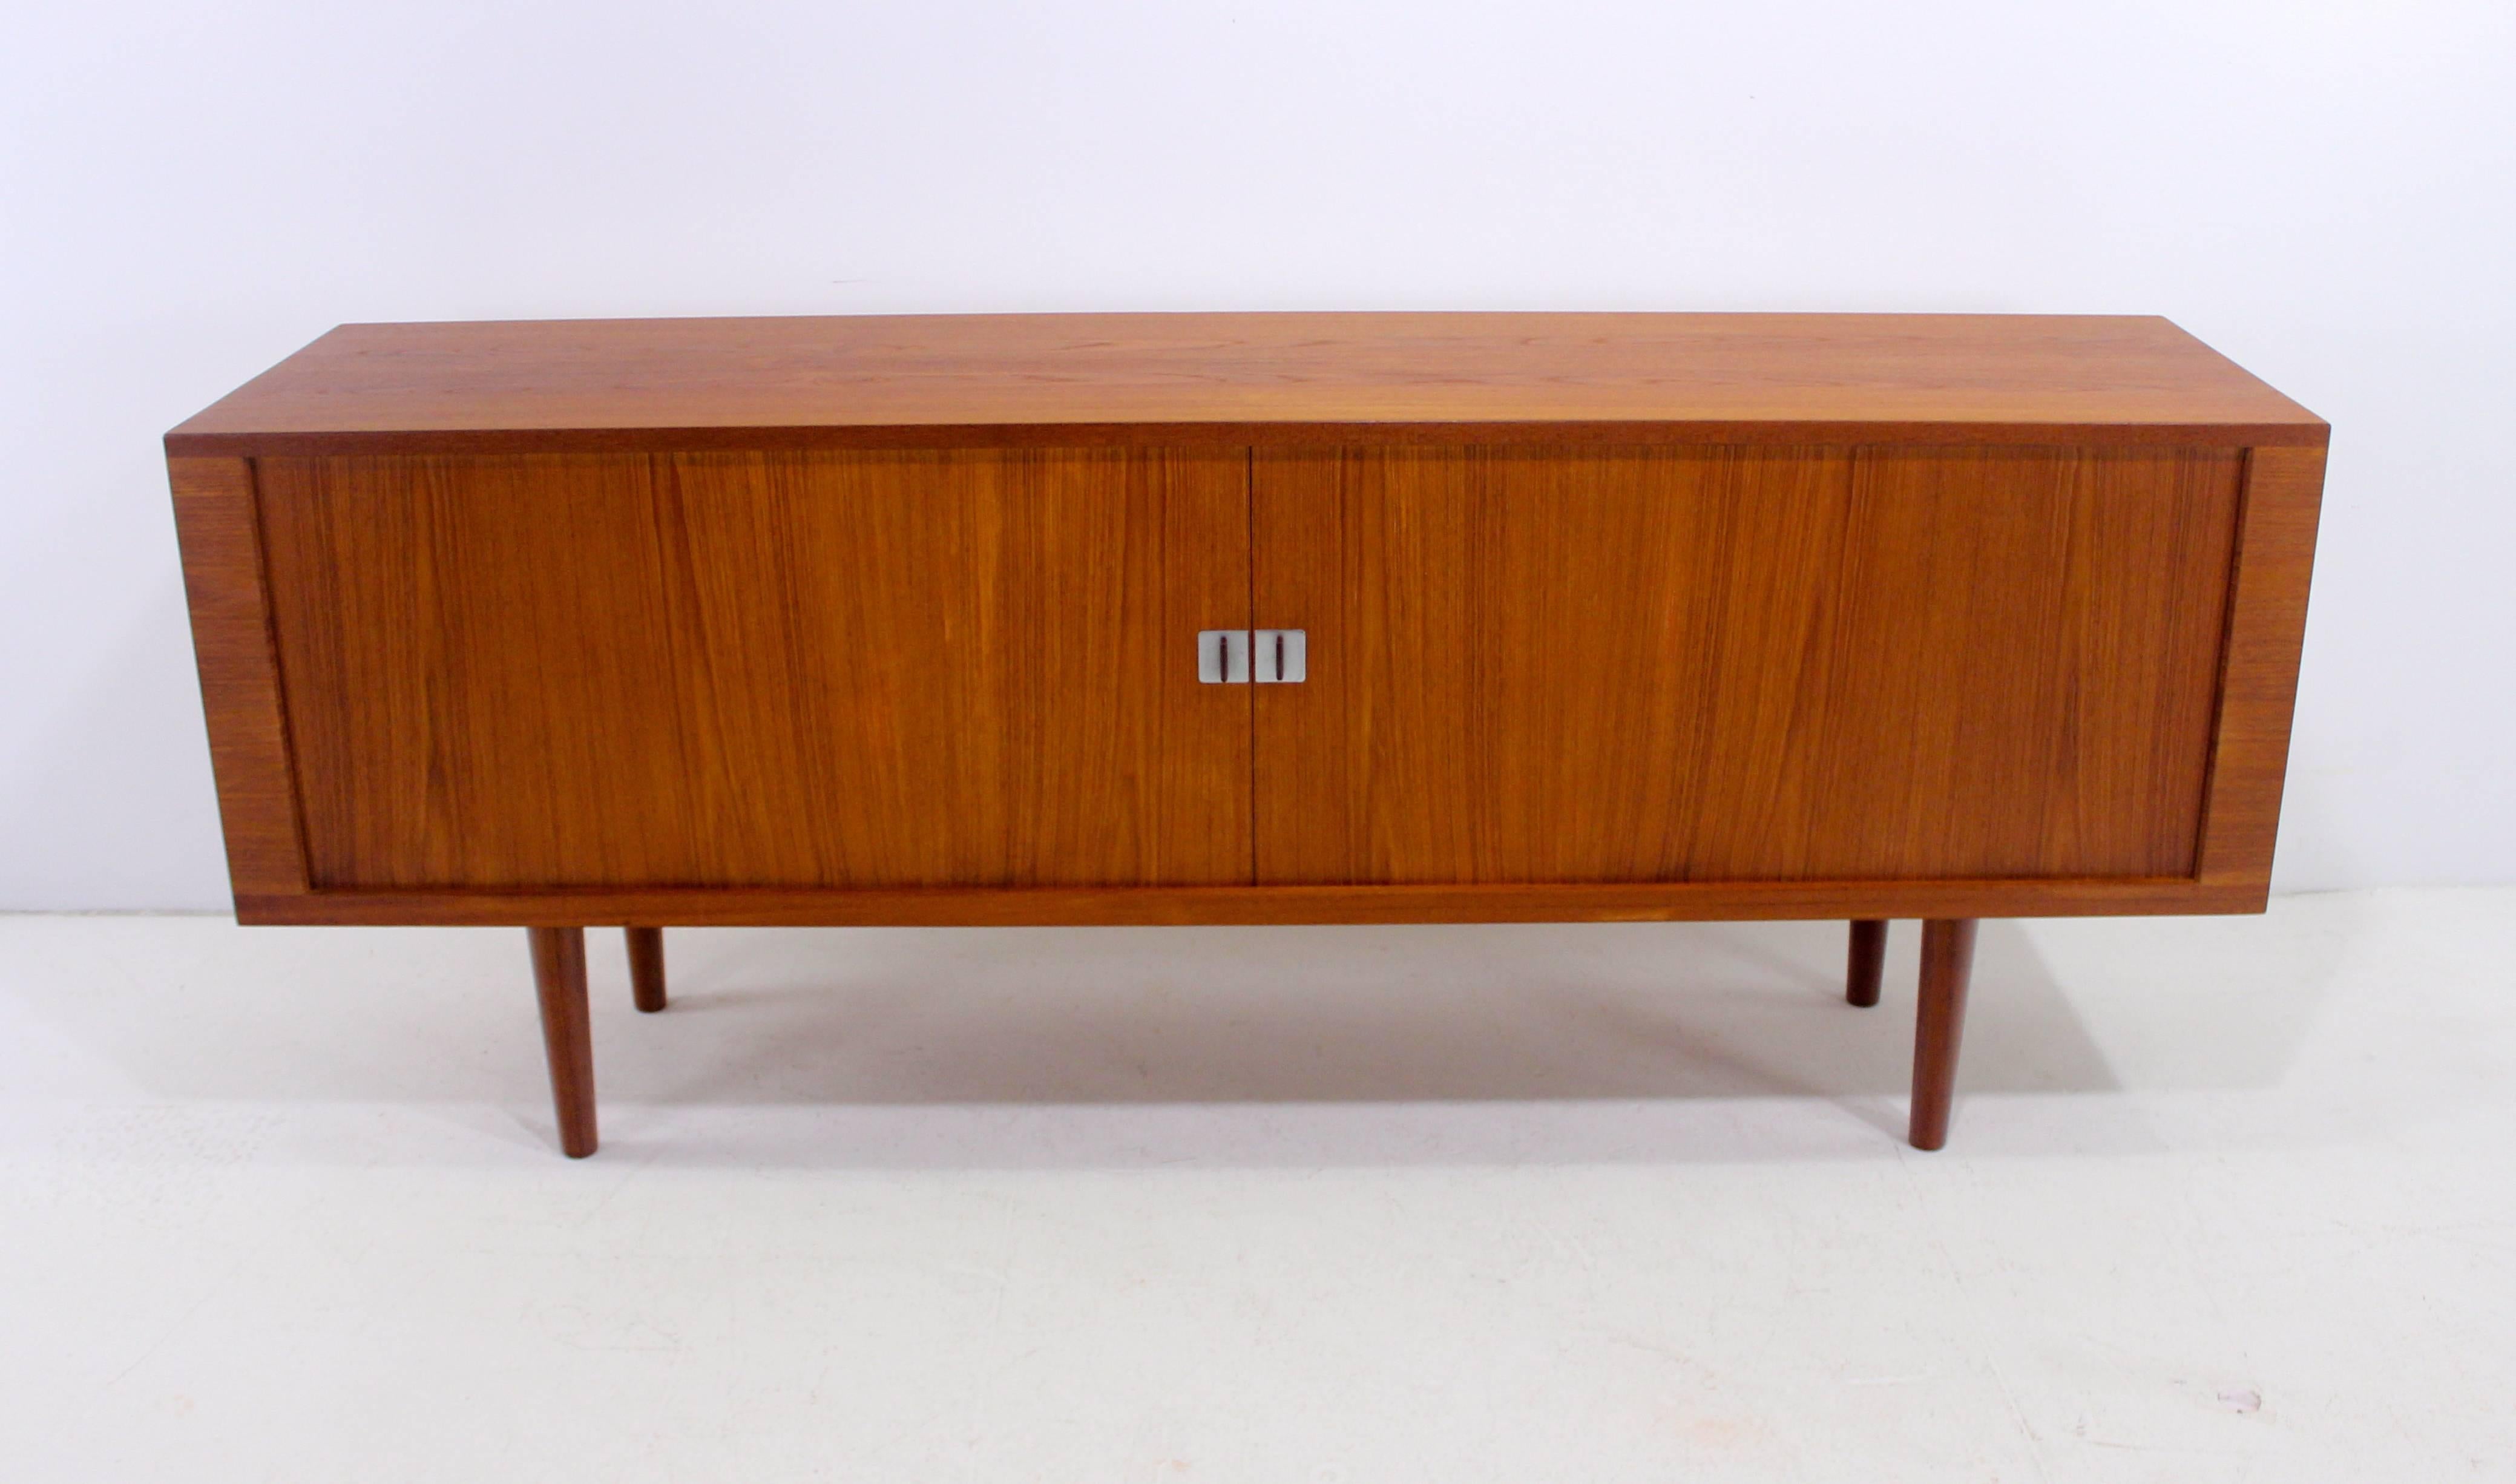 Danish modern credenza, "The President", designed by Hans Wegner.
Richly grained teak with oak interior.
Tambour doors, with elegant square metal pulls, glide open to adjustable shelves on each end. Six drawers in the middle.
Unparalleled